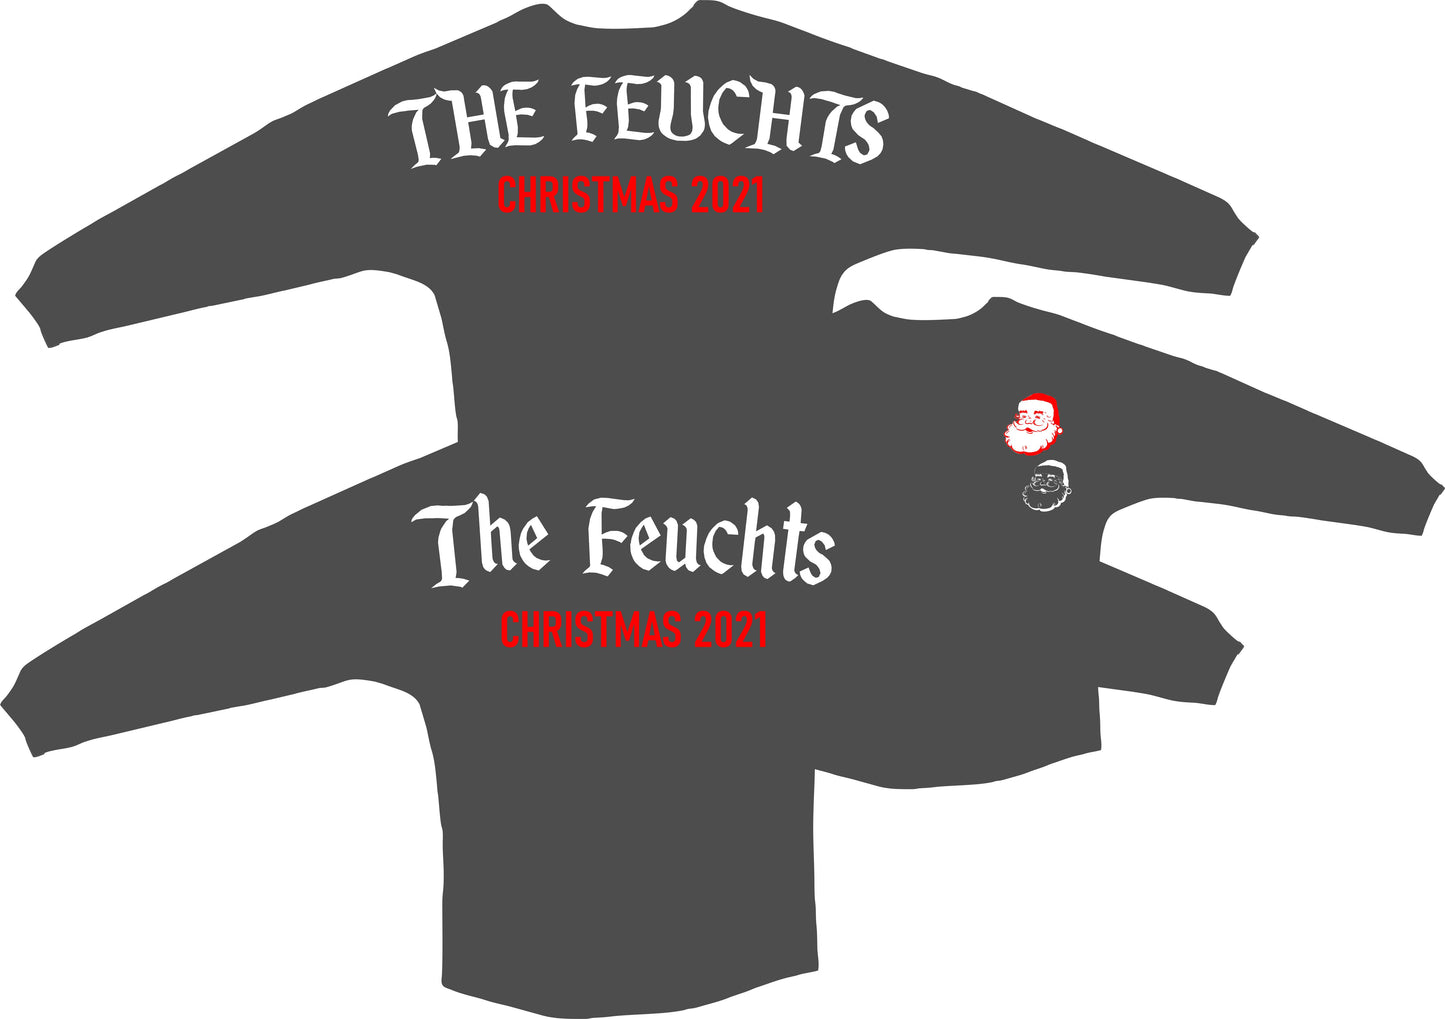 jersey for the Feuchts